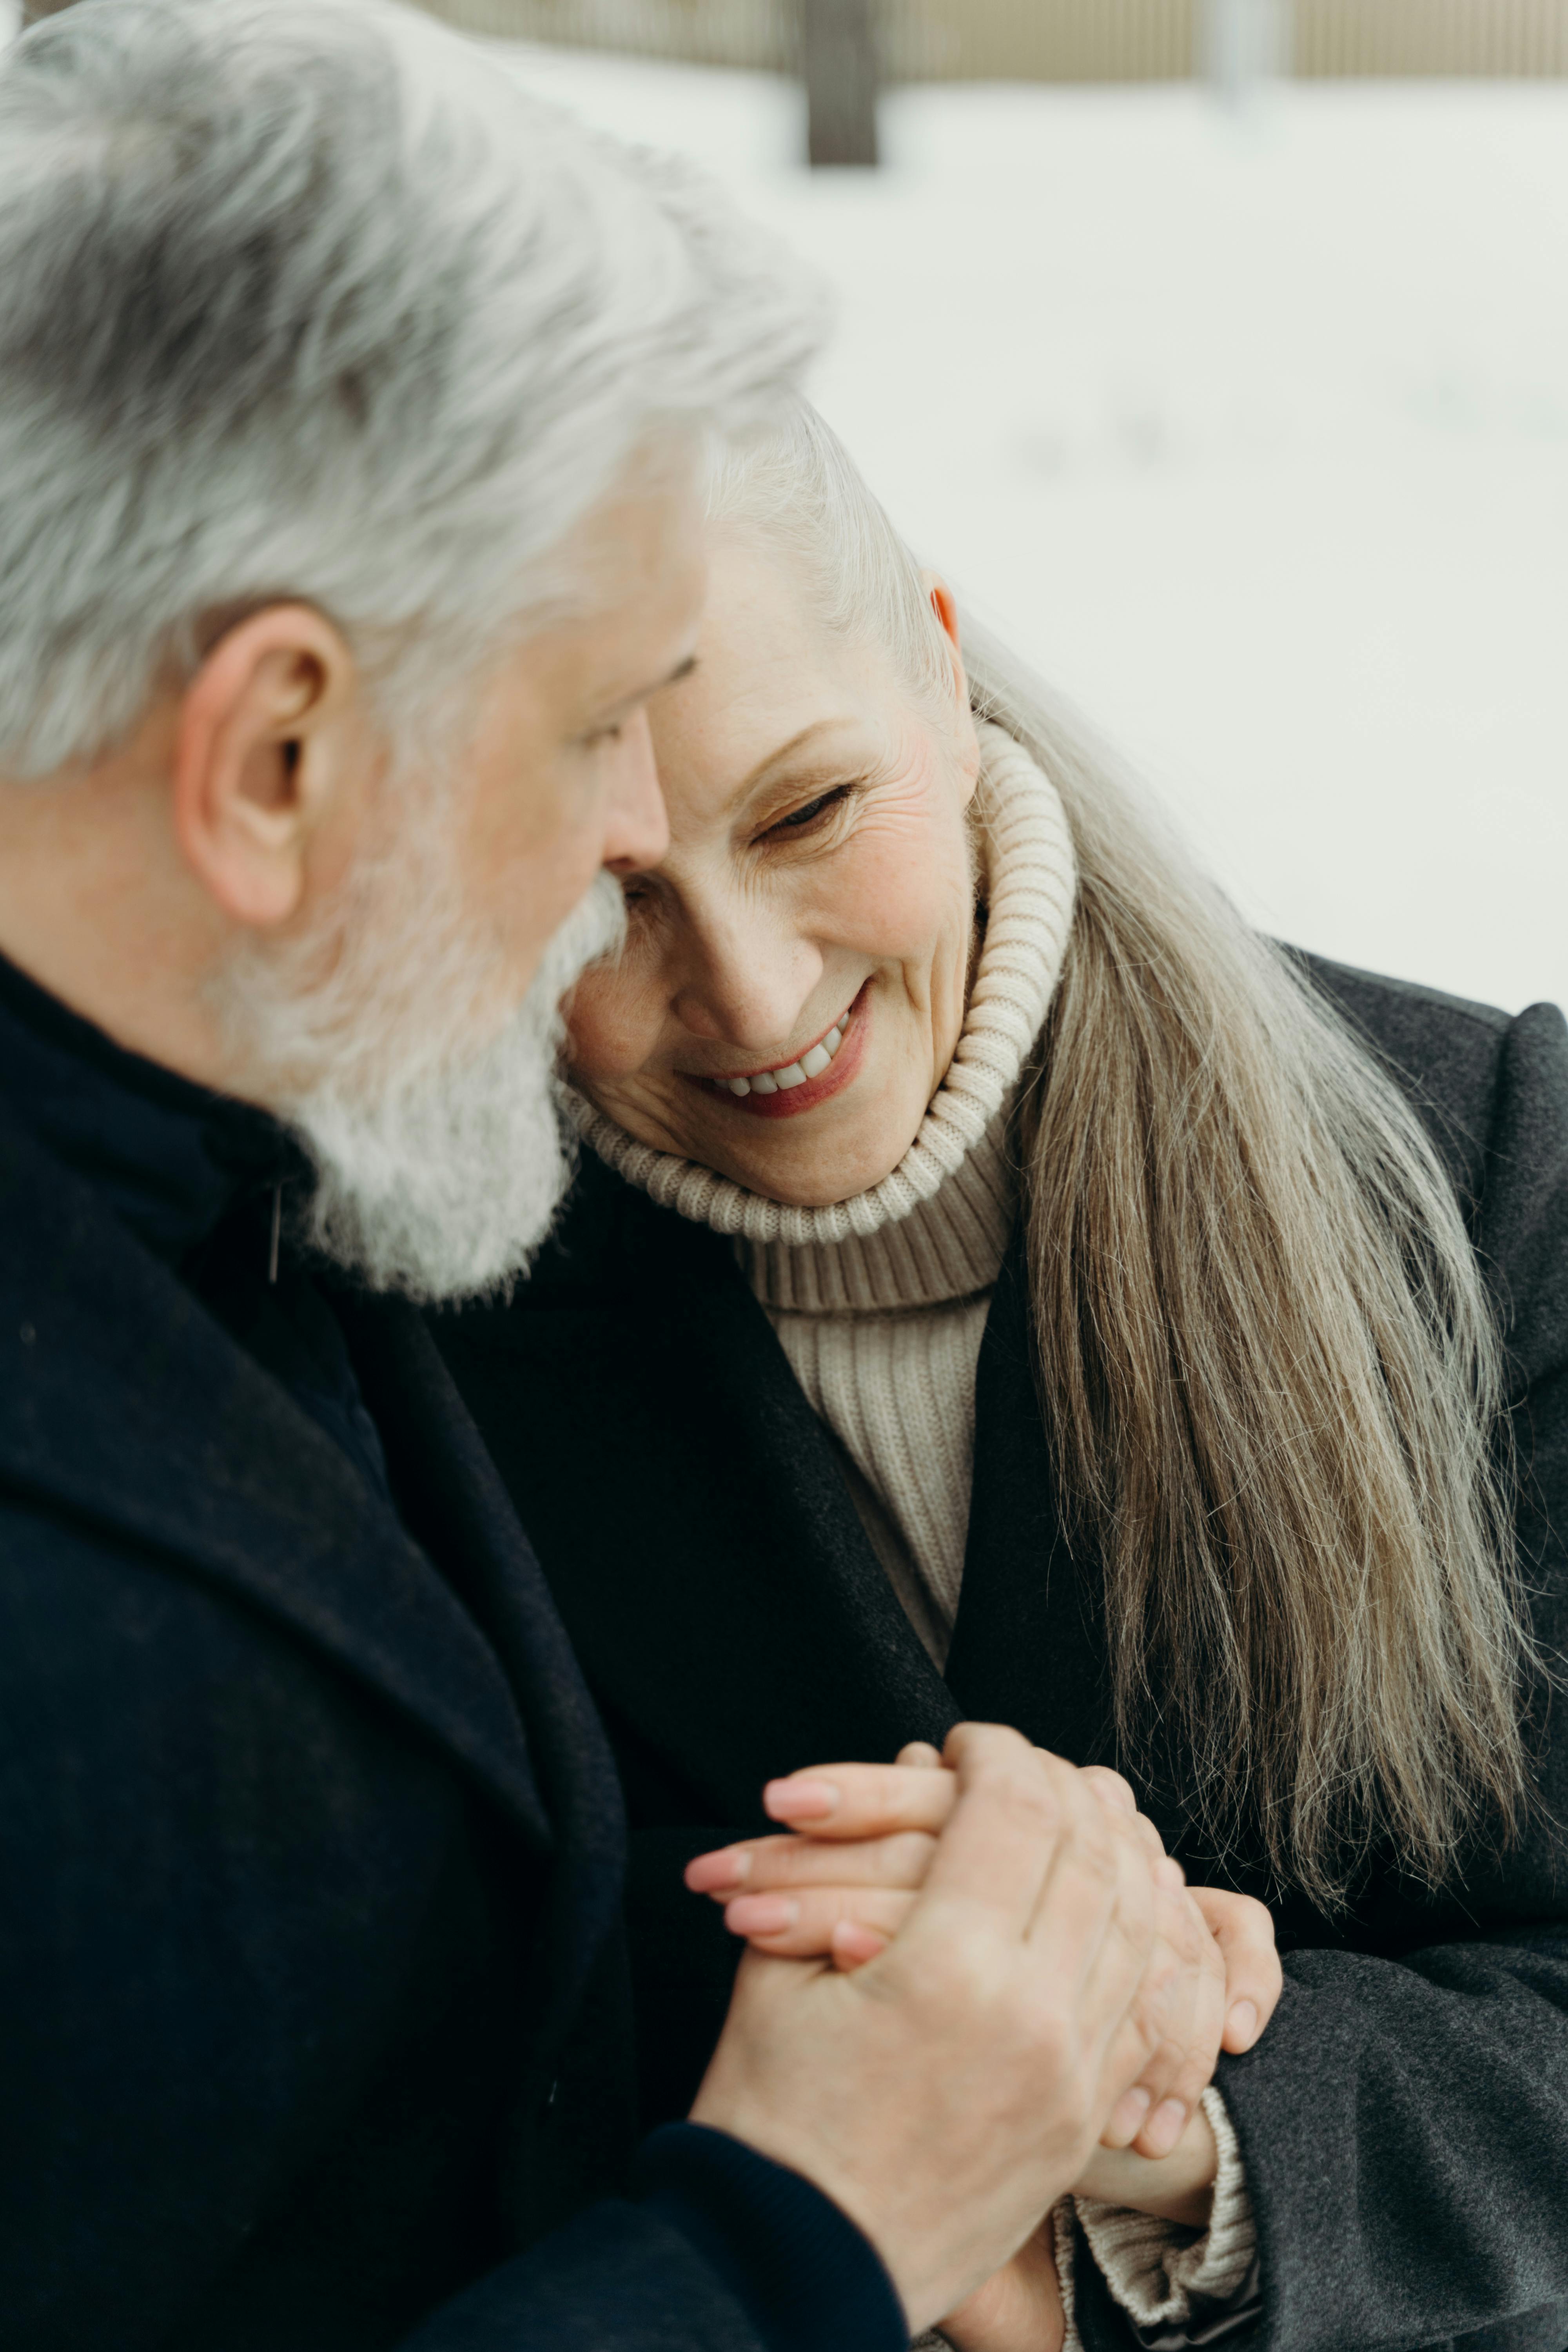 An older couple embracing | Source: Pexels